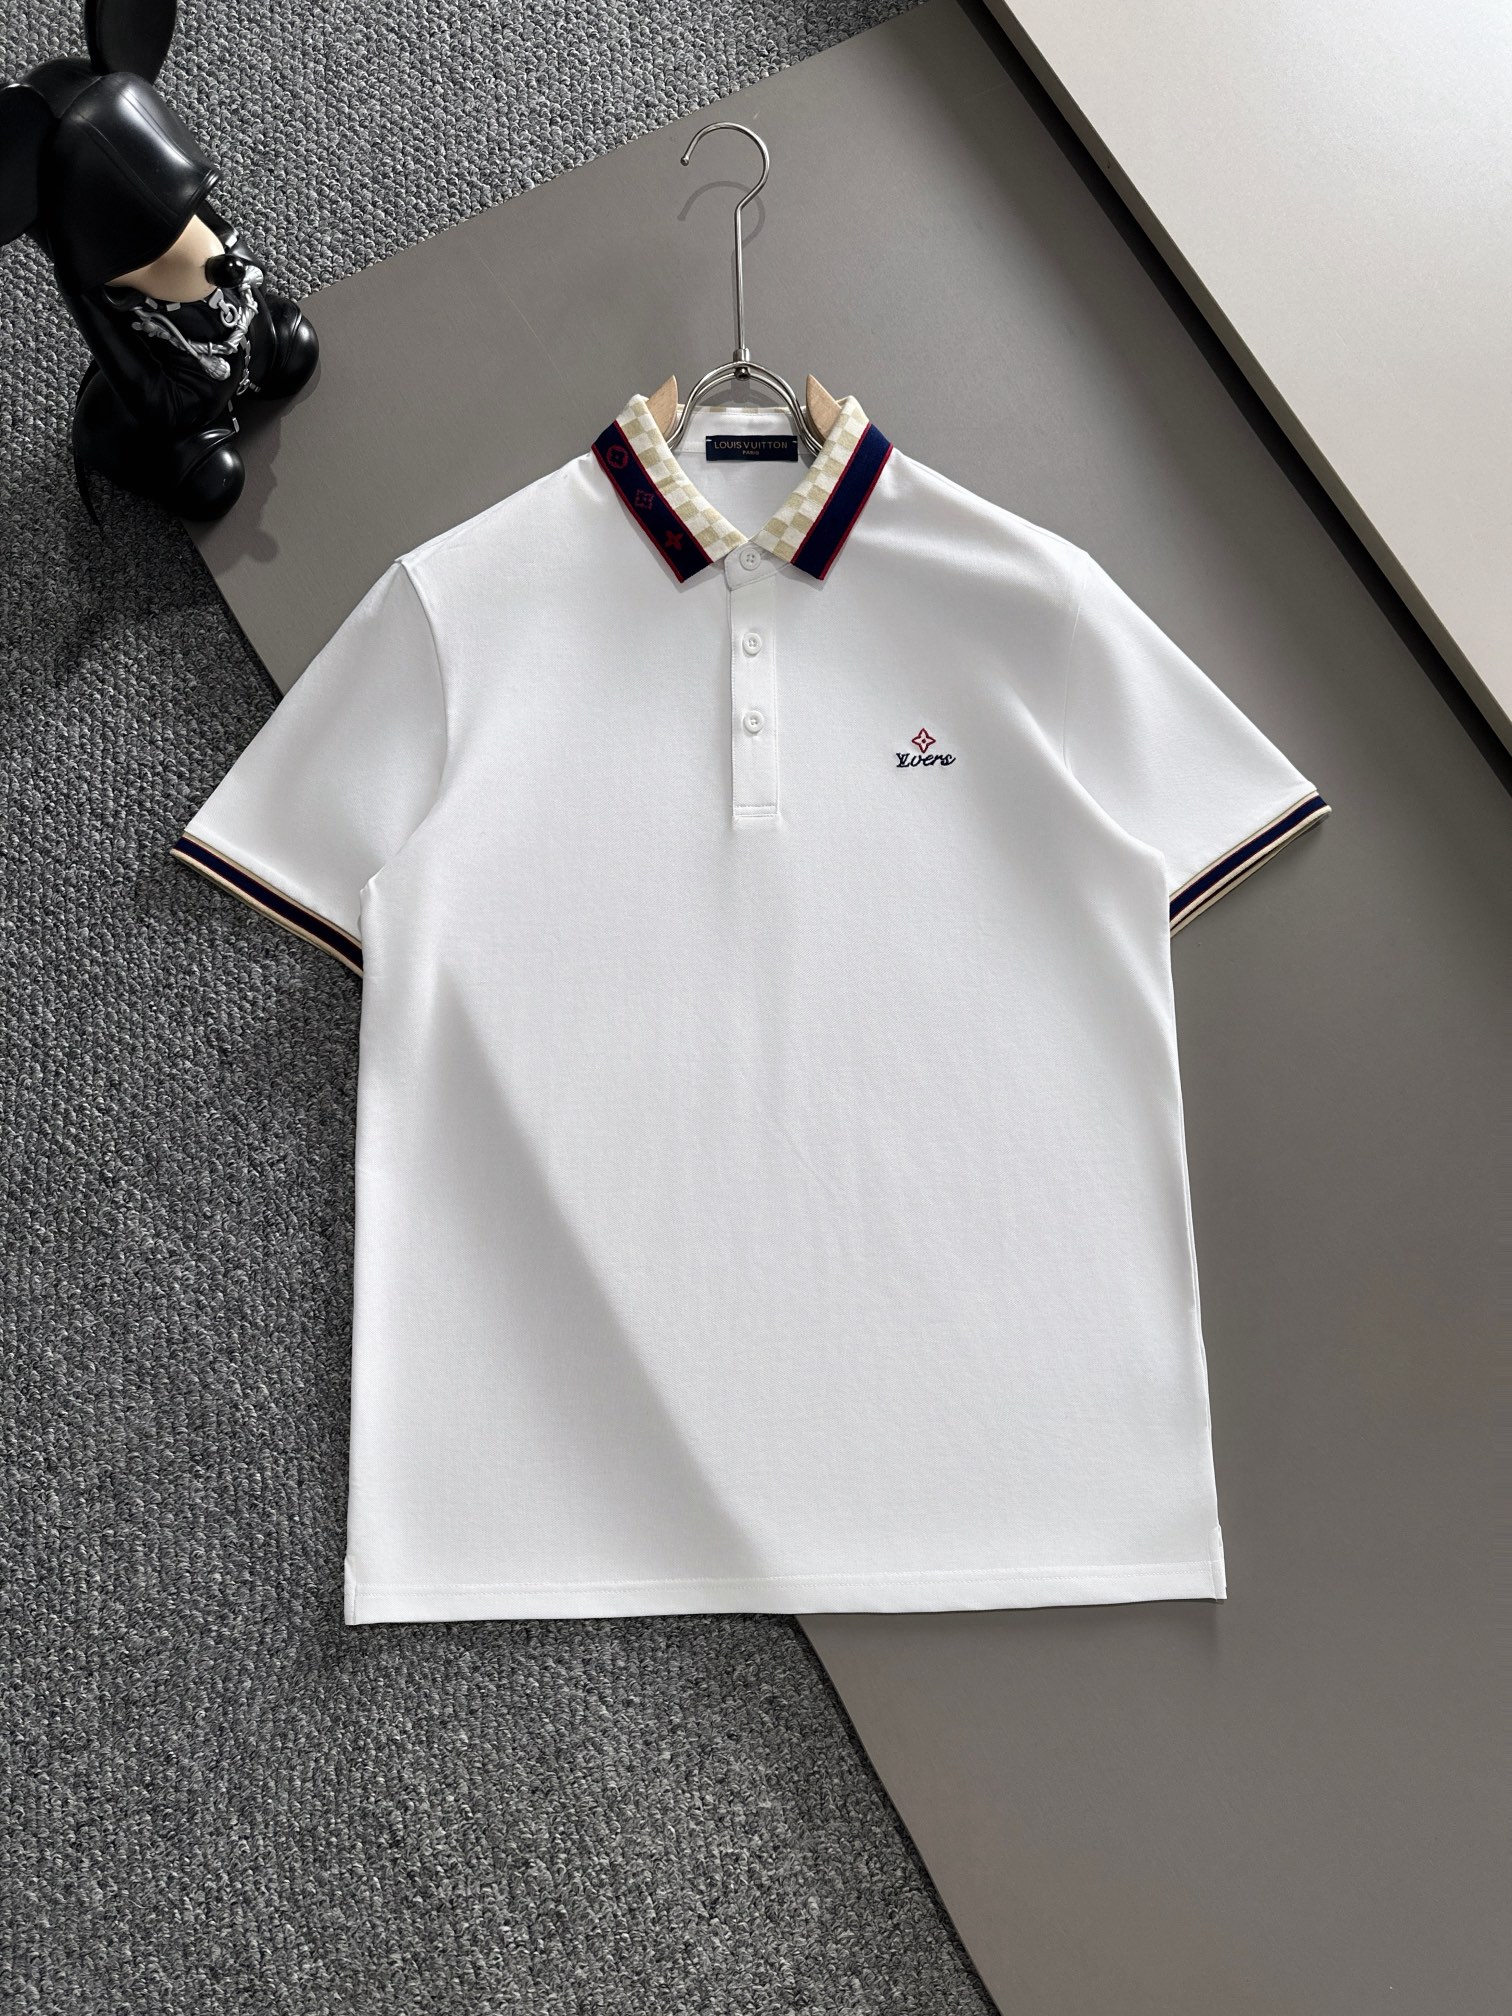 Louis Vuitton Clothing Polo T-Shirt Black White Embroidery Spring/Summer Collection Fashion